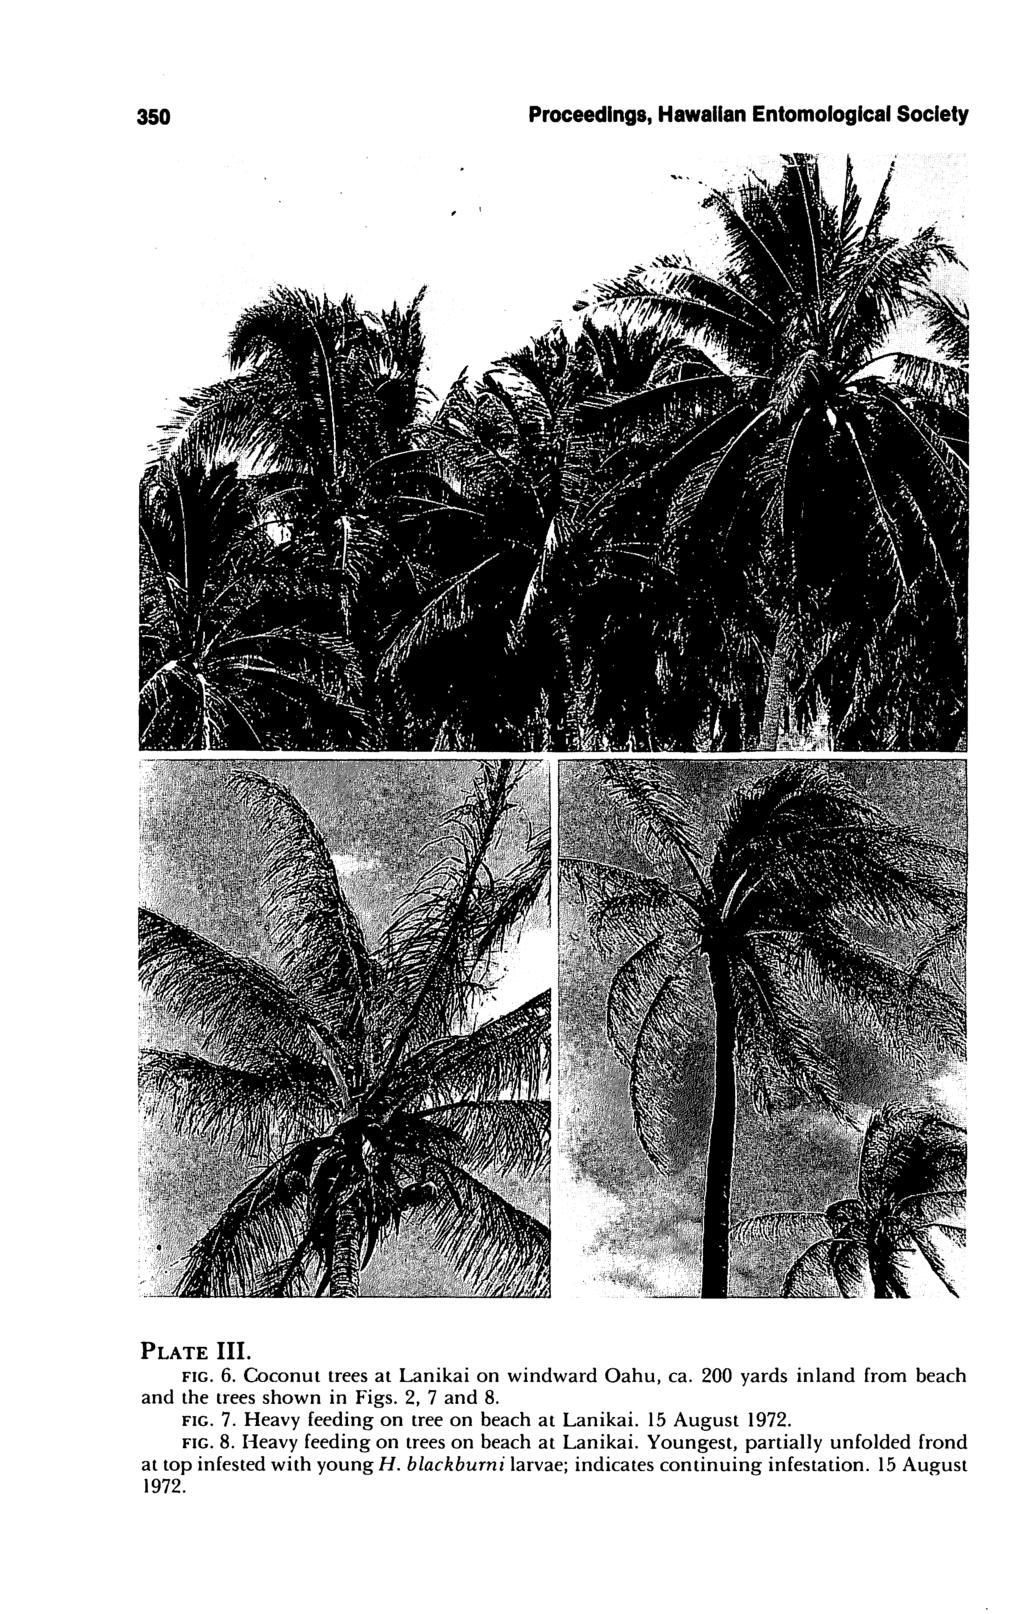 350 Proceedings, Hawaiian Entomological Society Plate III. fig. 6. Coconut trees at Lanikai on windward Oahu, ca. 200 yards inland from beach and the trees shown in Figs. 2, 7 